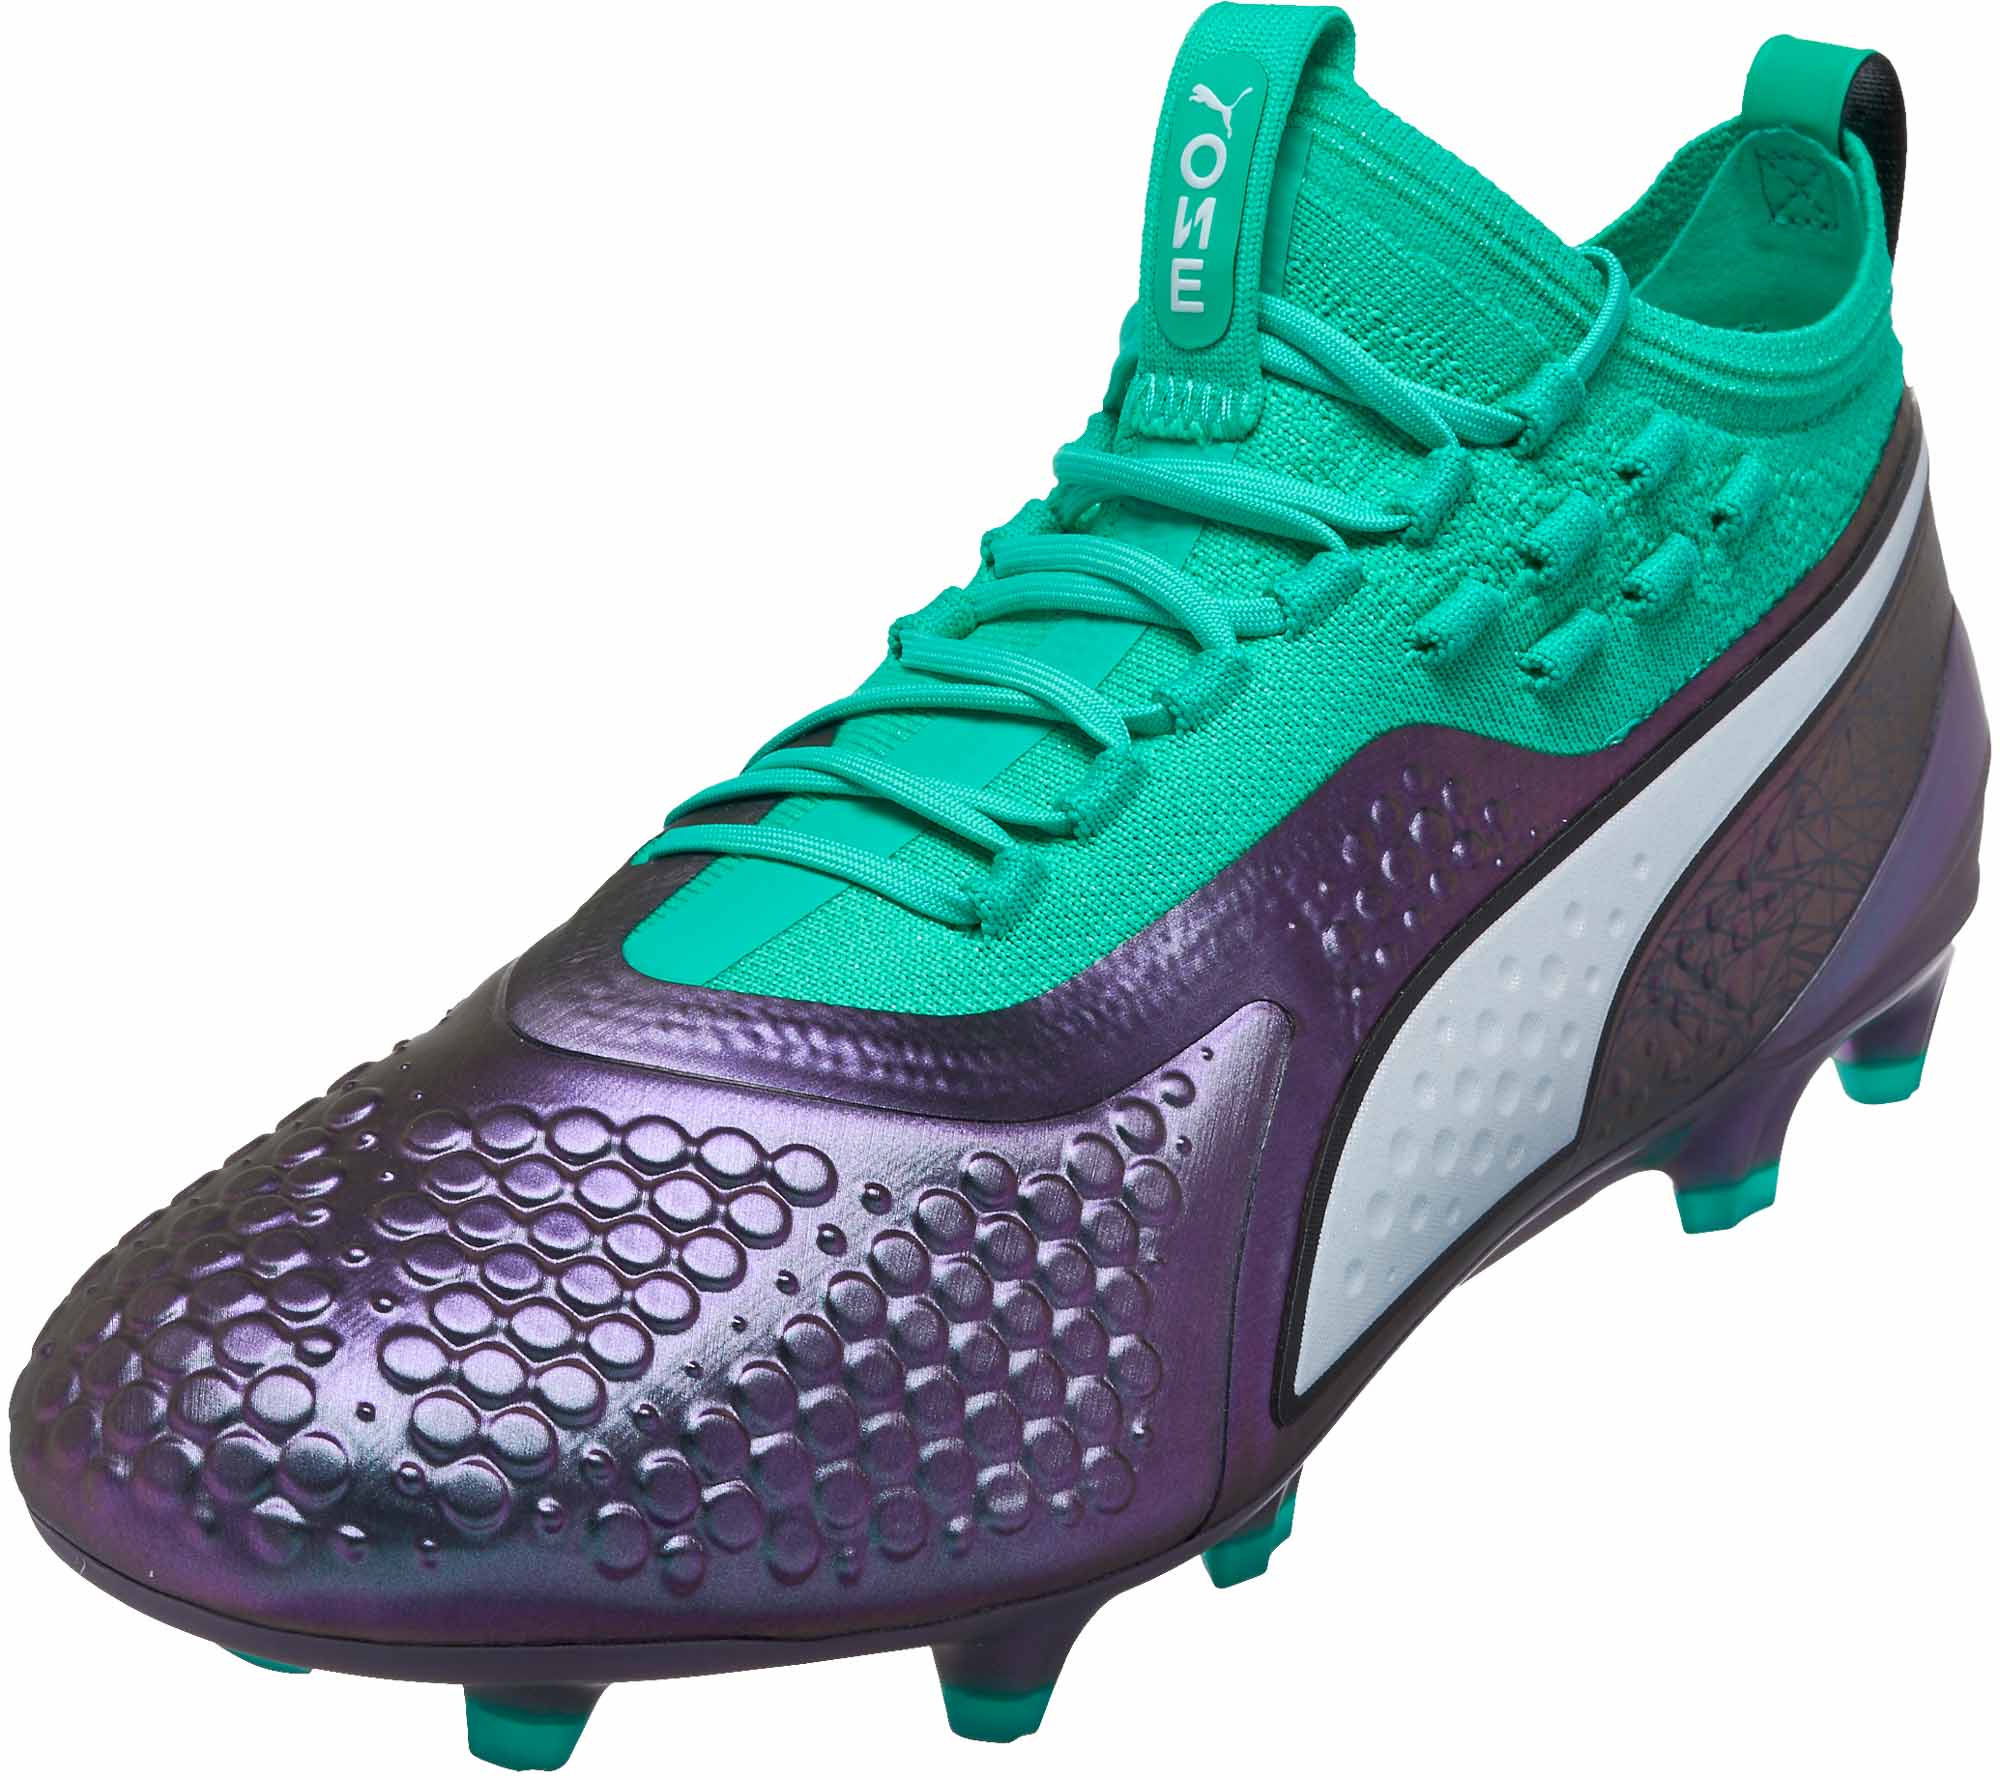 puma soccer boots for sale